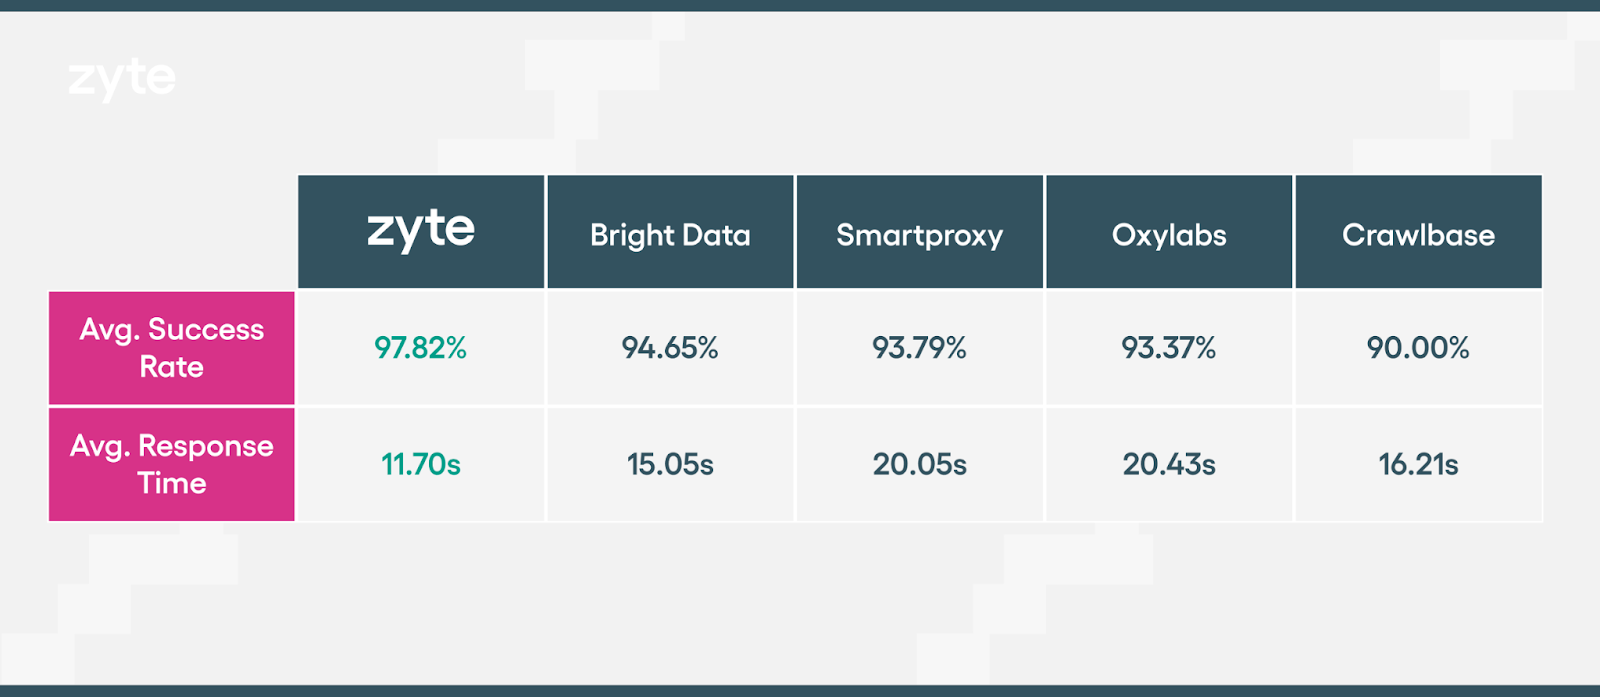 A table of Proxyway research results for average success rate and average reponse time for 5 companies: Zyte, Bright Data, Smartproxy, Oxylabs, and Crawlbase. Zyte has the best results.